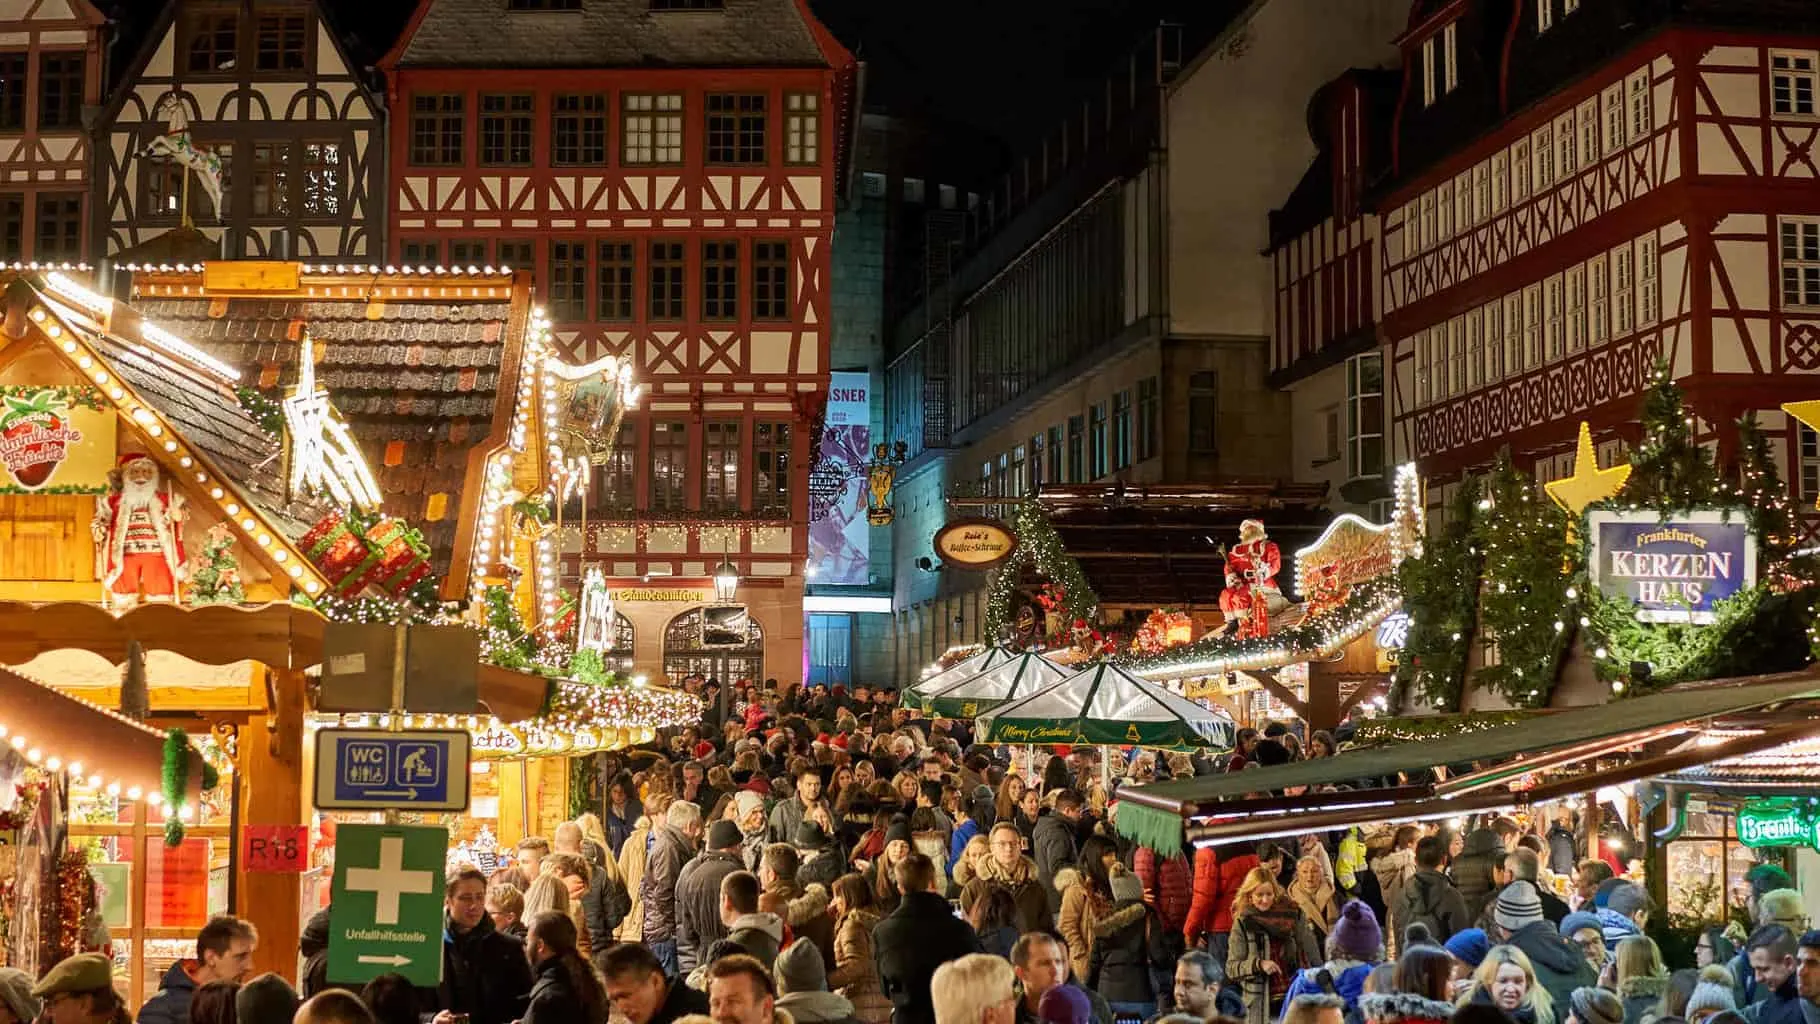 The vibrant Christmas market in the center of Frankfurt, Germany.